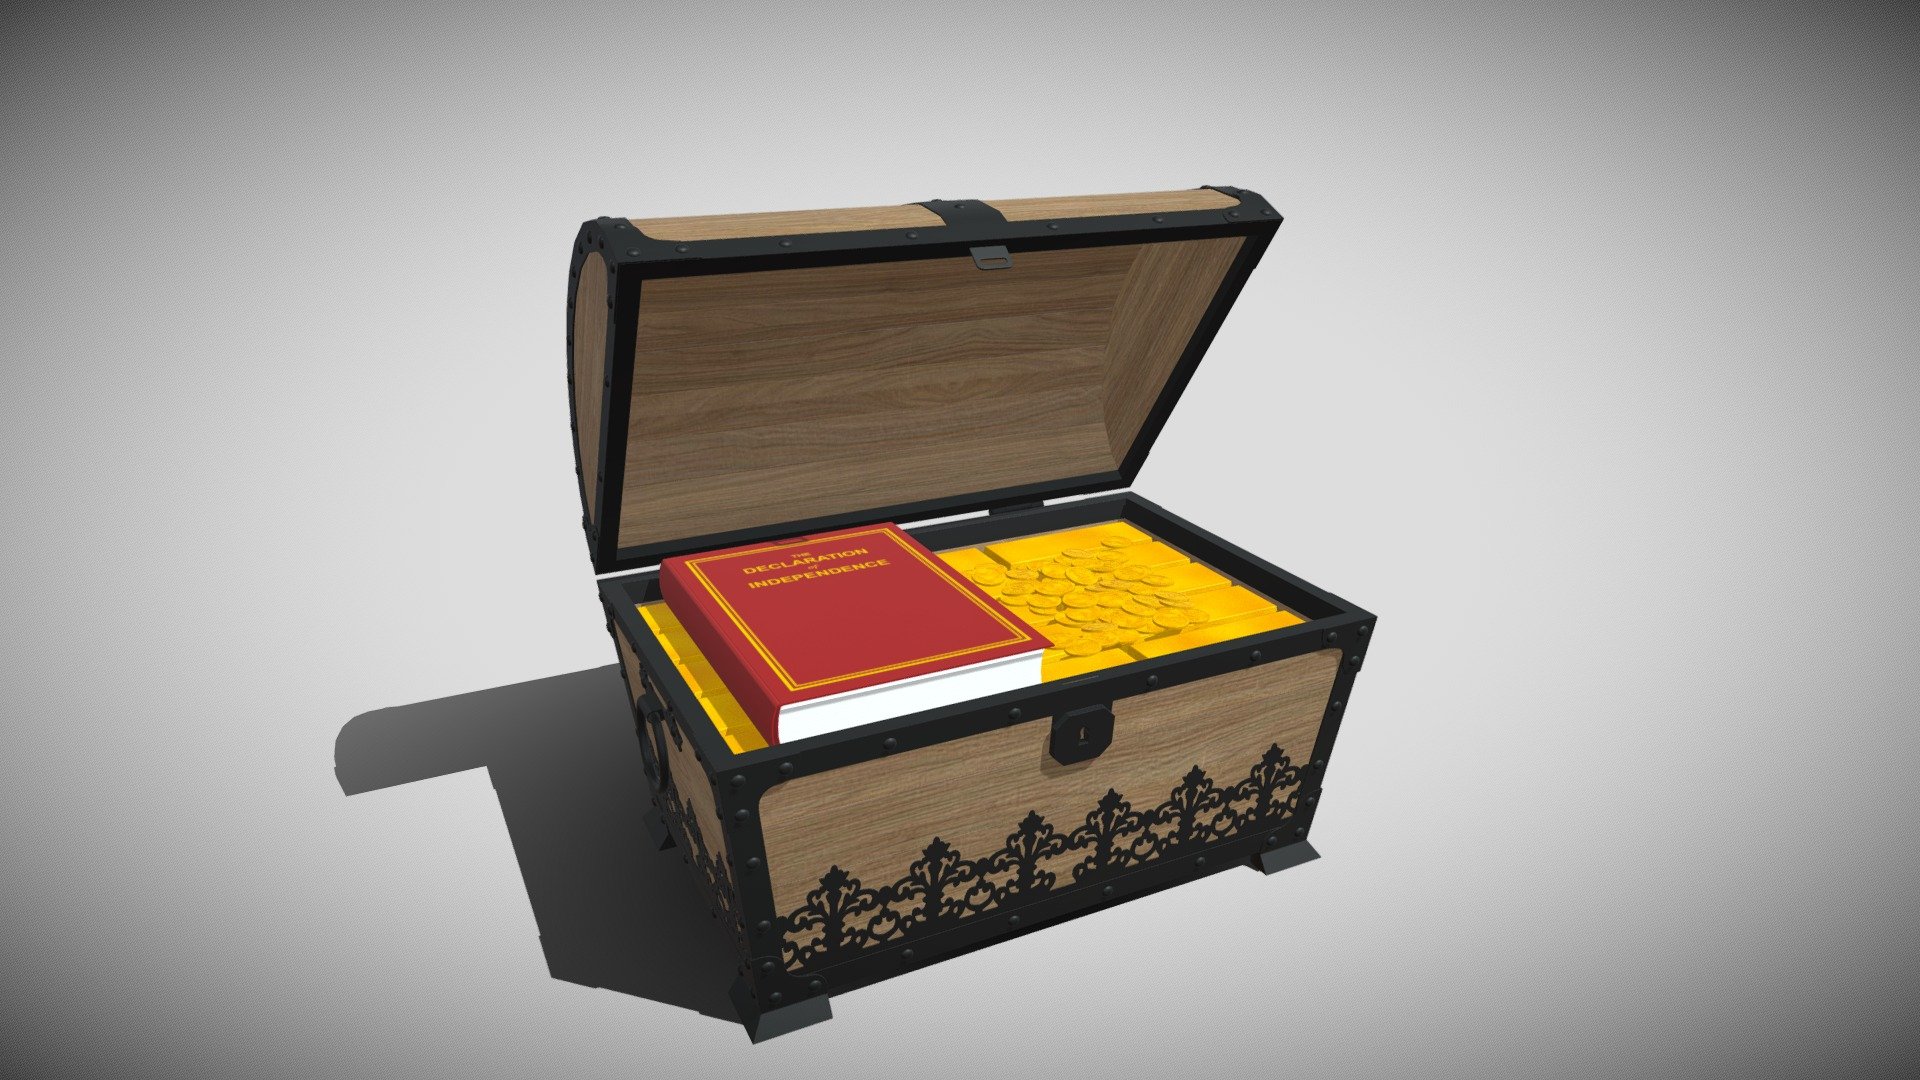 Detailed model of a Treasure Chest, modeled in Cinema 4D.The model was created using approximate real world dimensions. 

The model comprises of a trunk, some gold bars, 54 gold coins (one for each of the 54 countries in Africa) and a book that contains copies of the declarations of independence of all countries in Africa.

The model has 143,892 polys and 132,747 vertices.

An additional file has been provided containing the original Cinema 4D project files with both standard and v-ray materials, textures and other 3d export files such as 3ds, fbx and obj 3d model